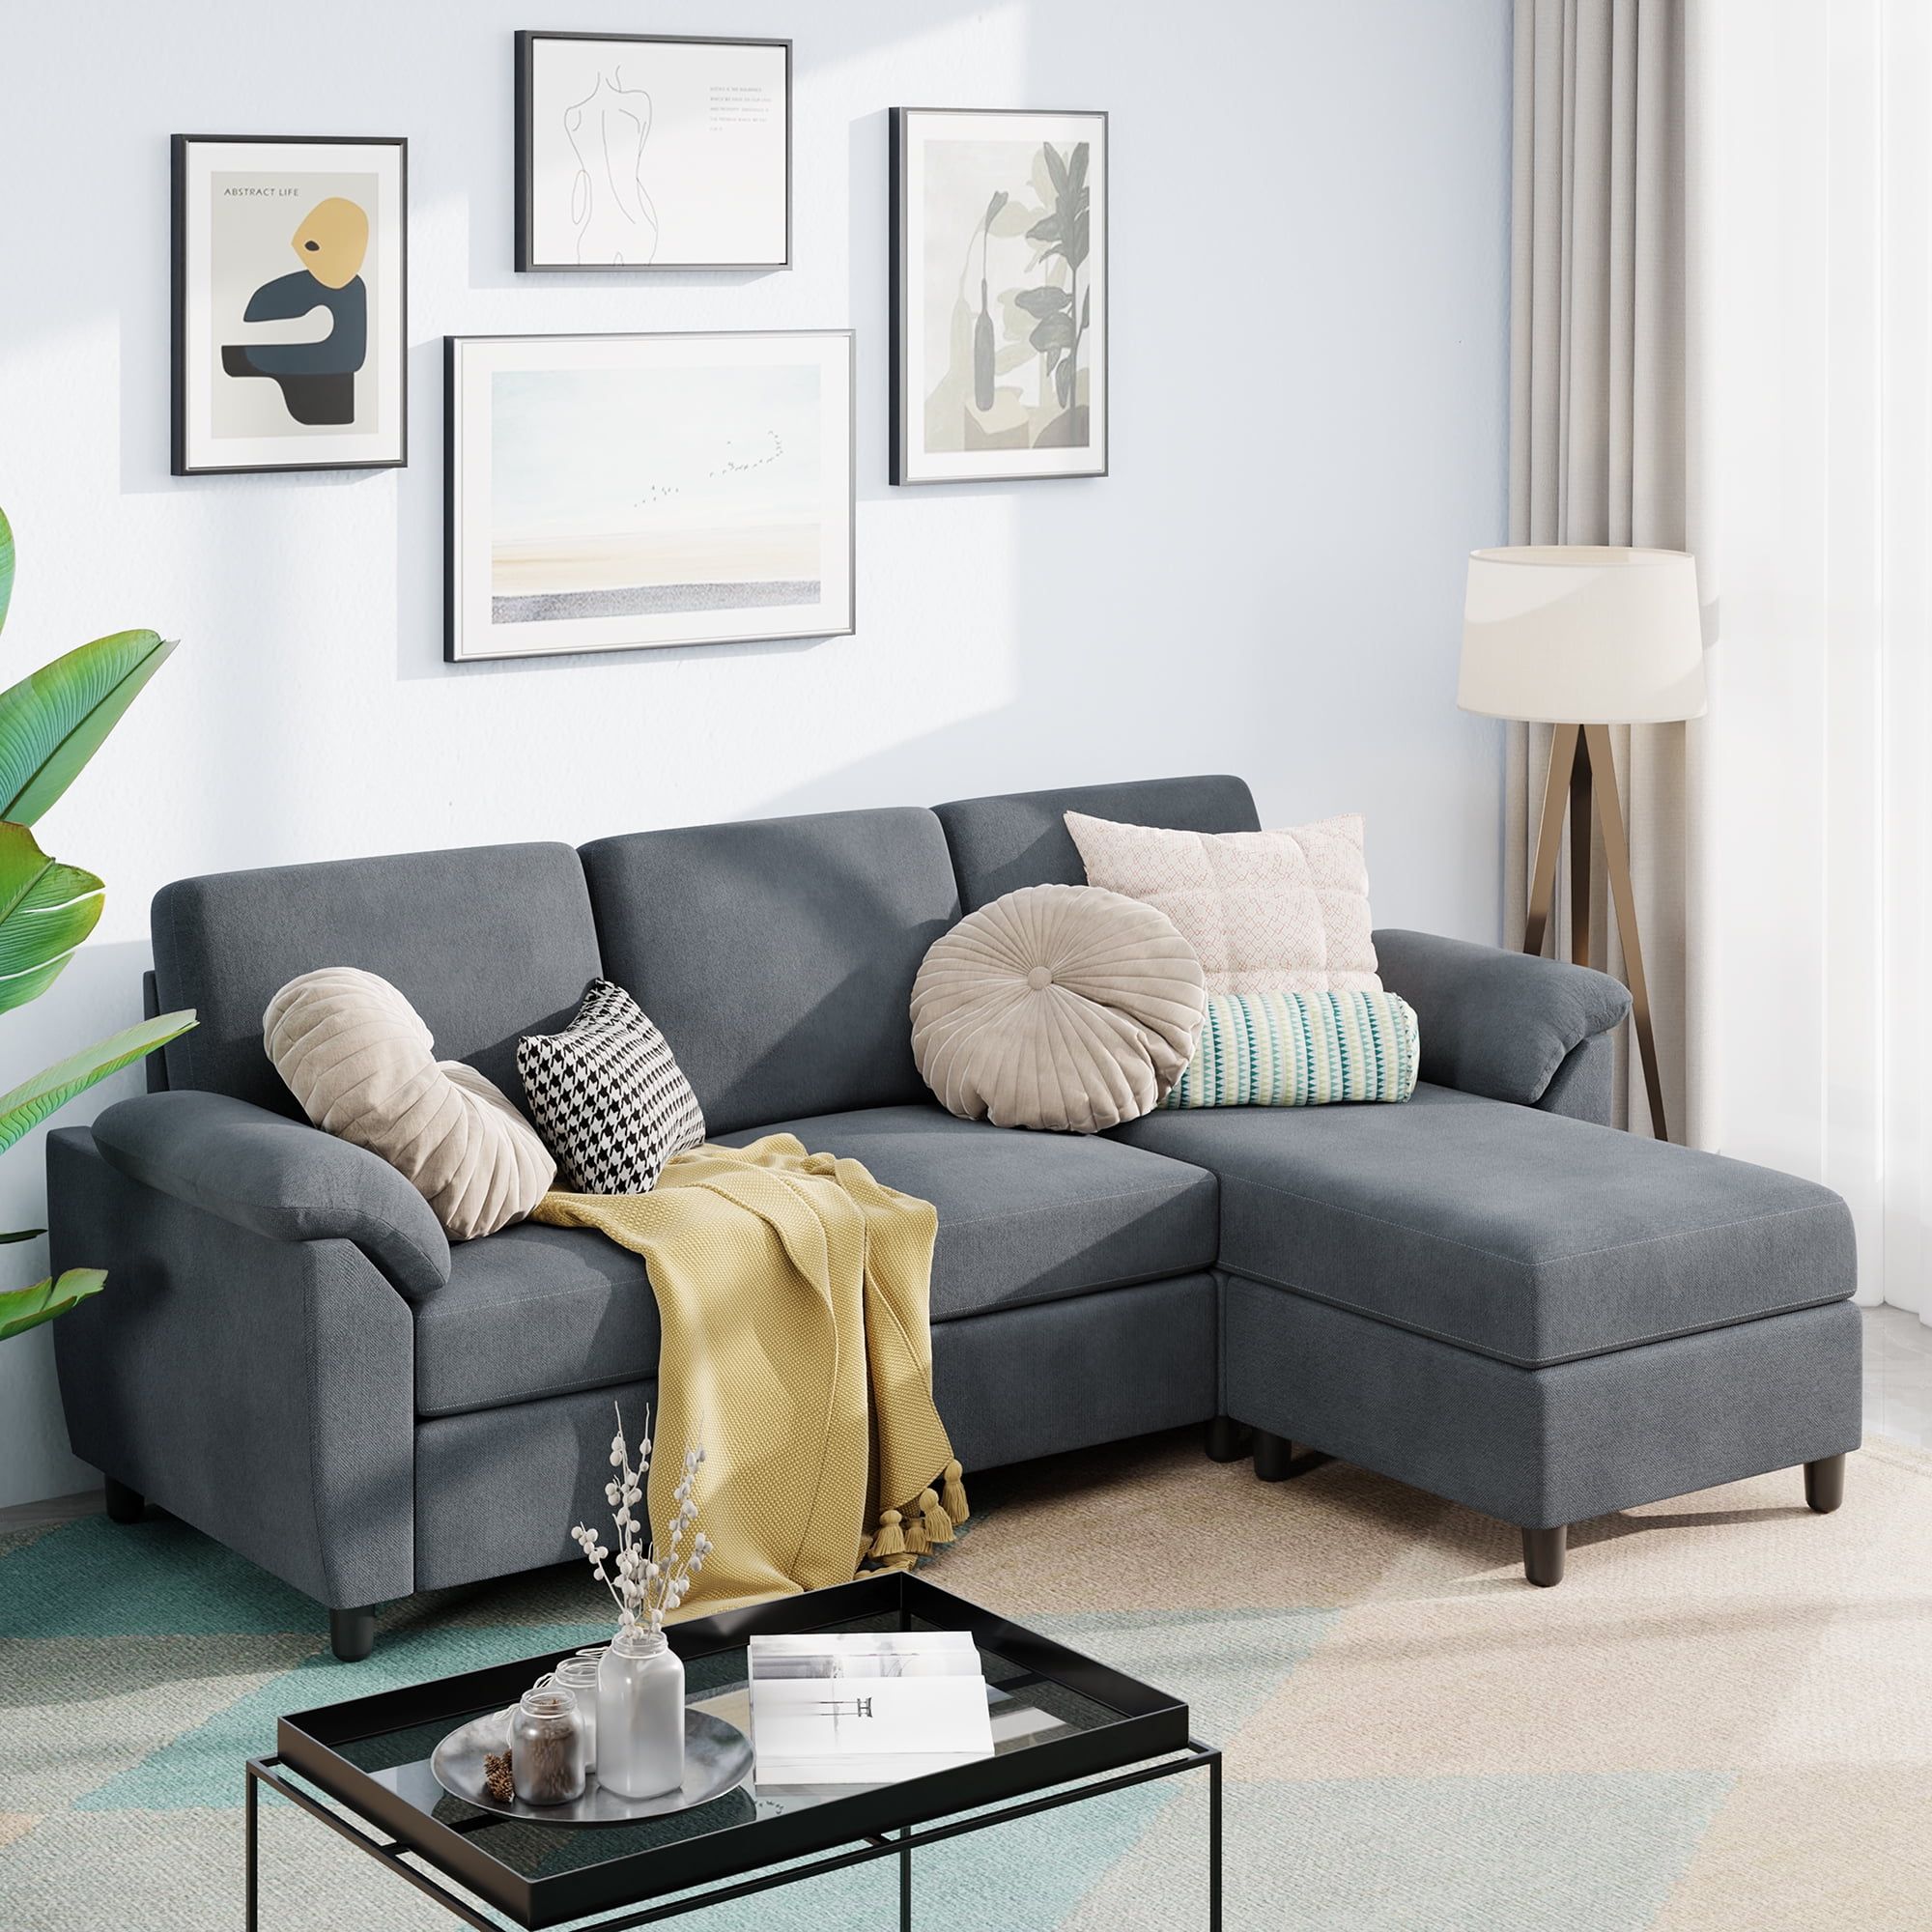 Sobaniilo 79" Convertible Sectional Sofa Couch, 3 Seat L Shaped Sofa With  Removable Pillows Linen Fabric Small Couch Mid Century For Living Room,  Apartment And Office (gray) – Walmart Pertaining To Convertible L Shaped Sectional Sofas (View 3 of 15)